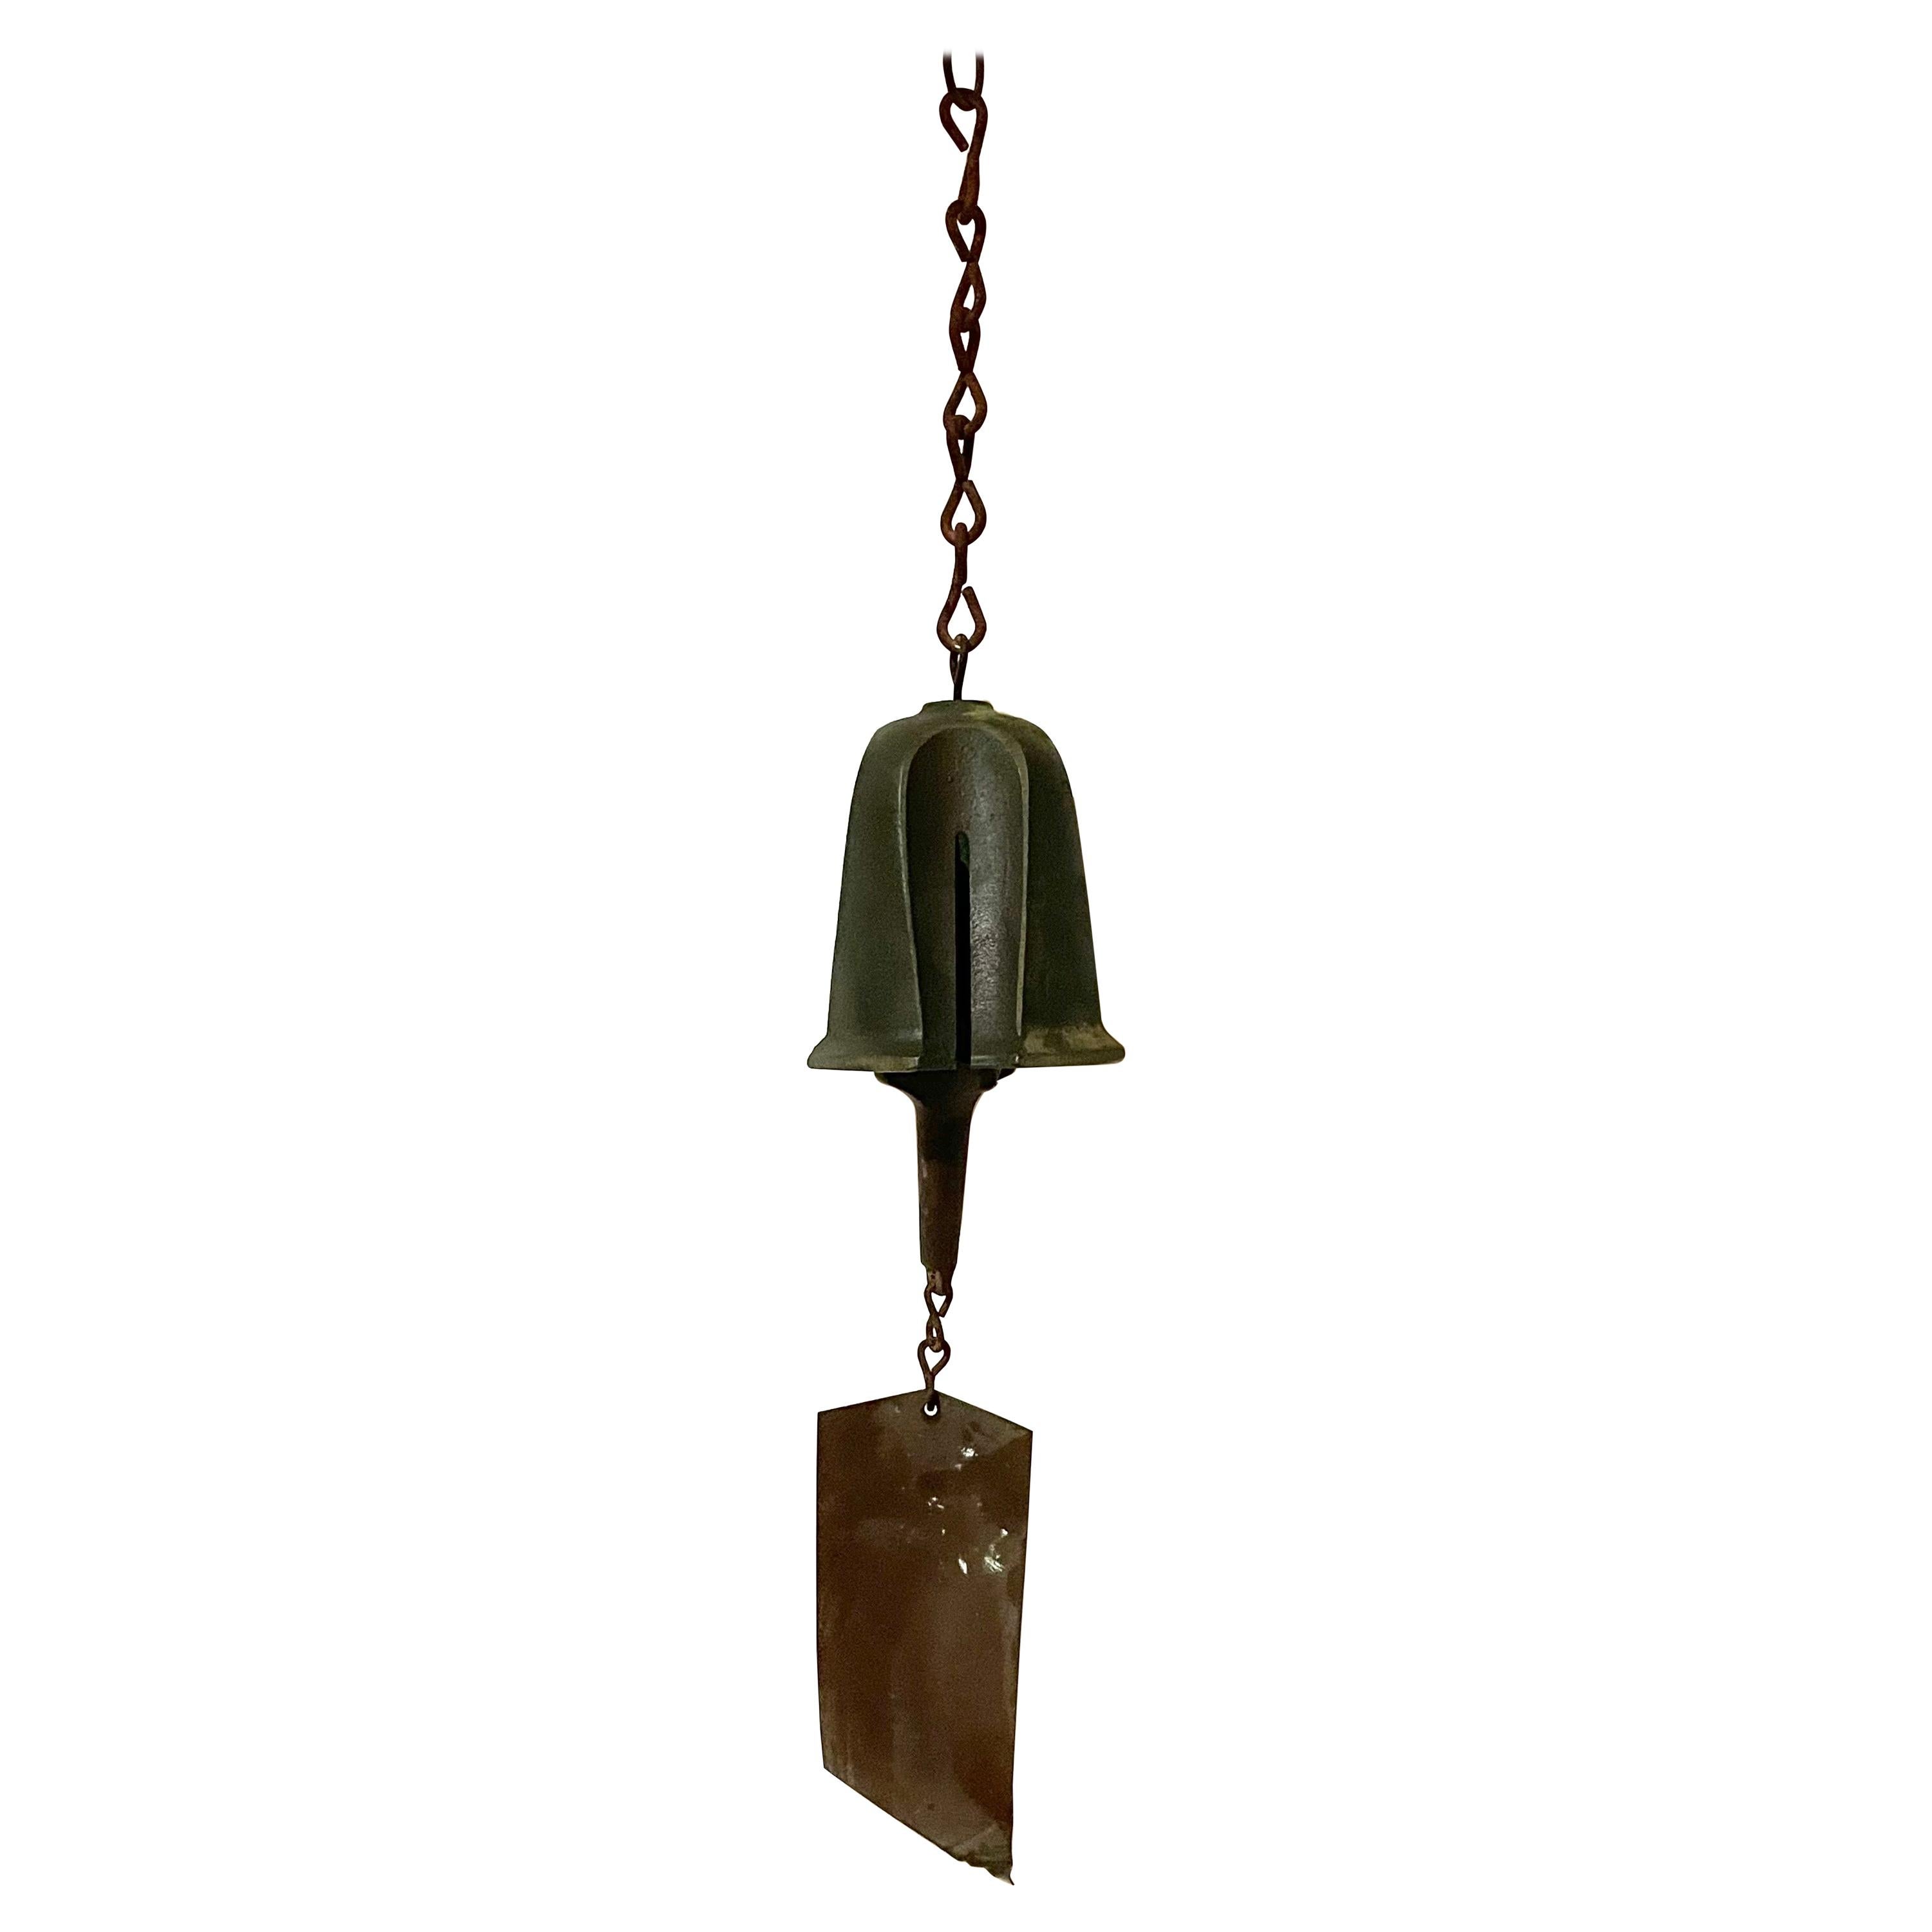 Vintage Bronze Bell by Paolo Soleri